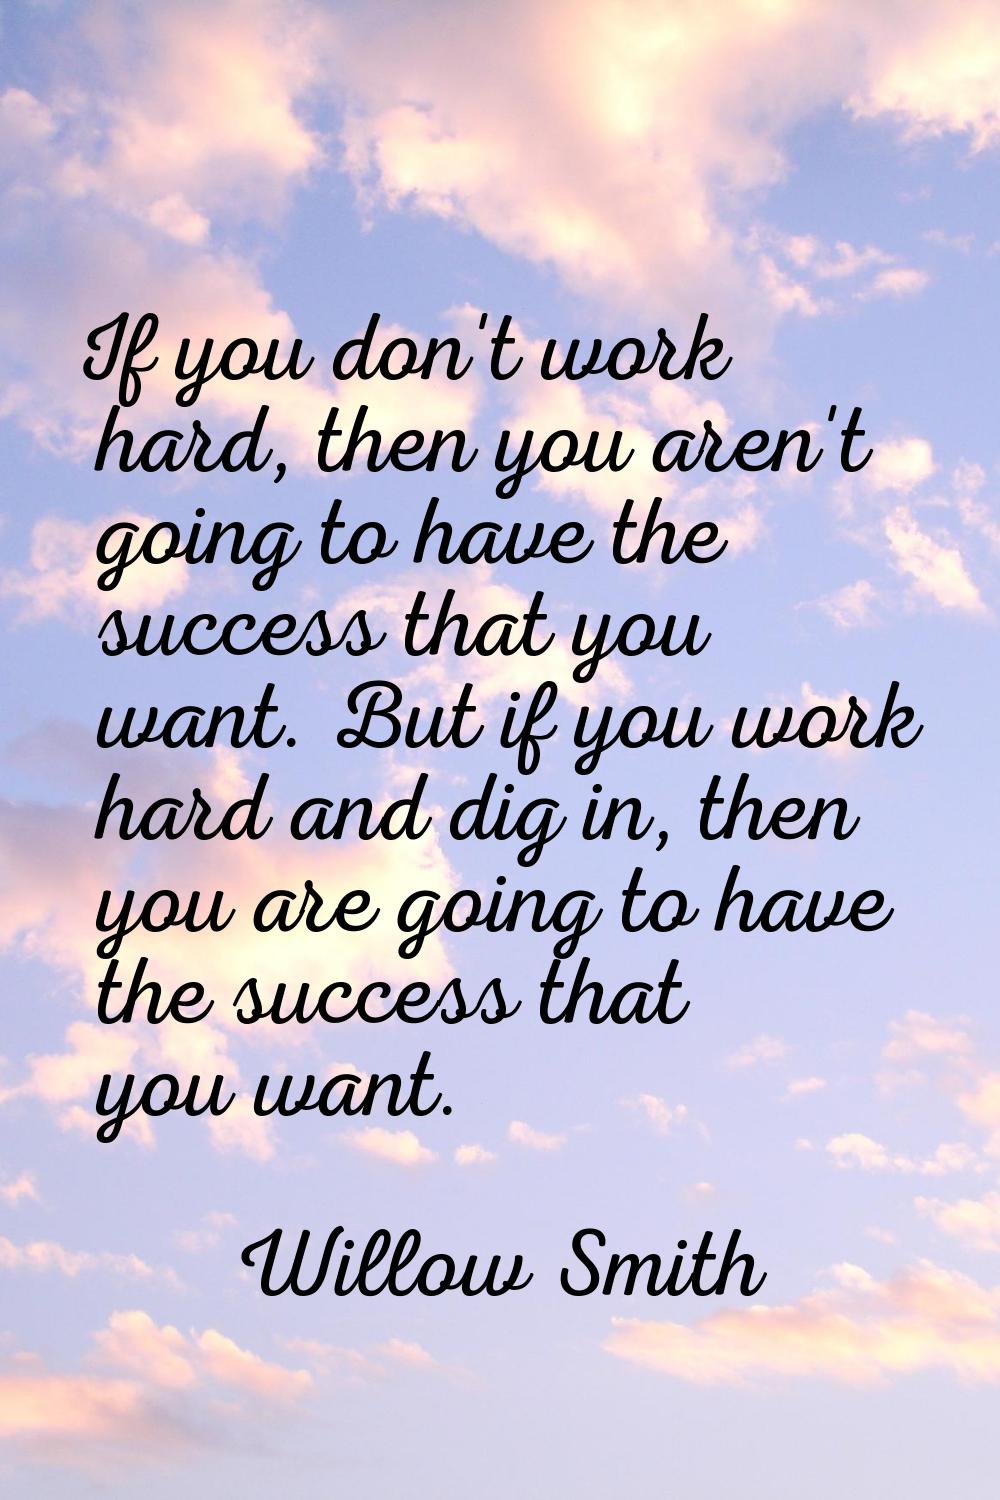 If you don't work hard, then you aren't going to have the success that you want. But if you work ha